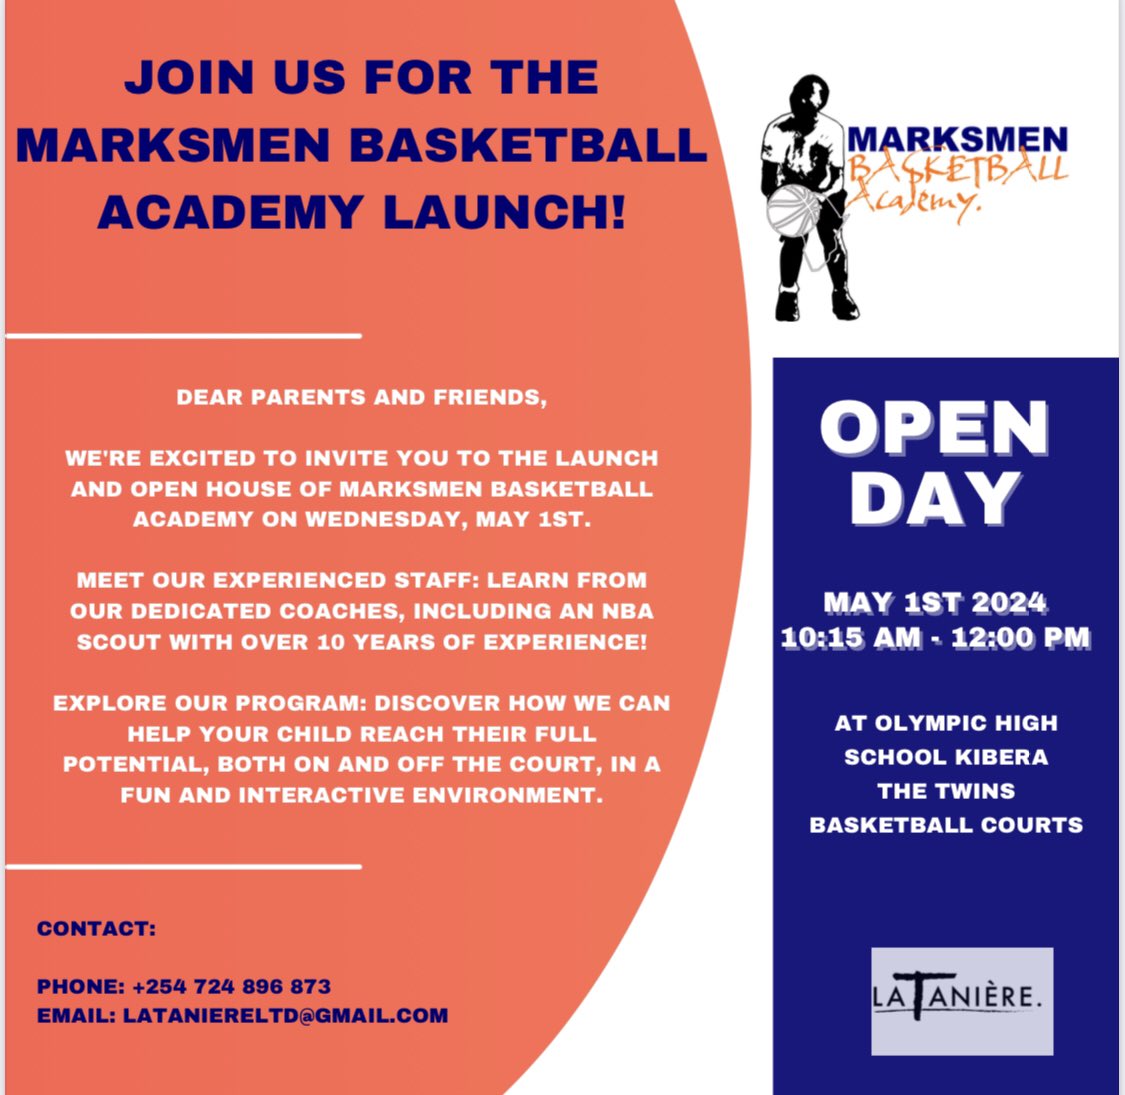 We’re thrilled to announce the launch of Marksmen Basketball Academy, a collaborative effort between La Tanière LTD and the African Basketball Dreamers Association(ABDA) with the support of the @kbf_basketball Phone: +254 724 896 873 Daniel O La Tanière LTD & ABDA Partnership